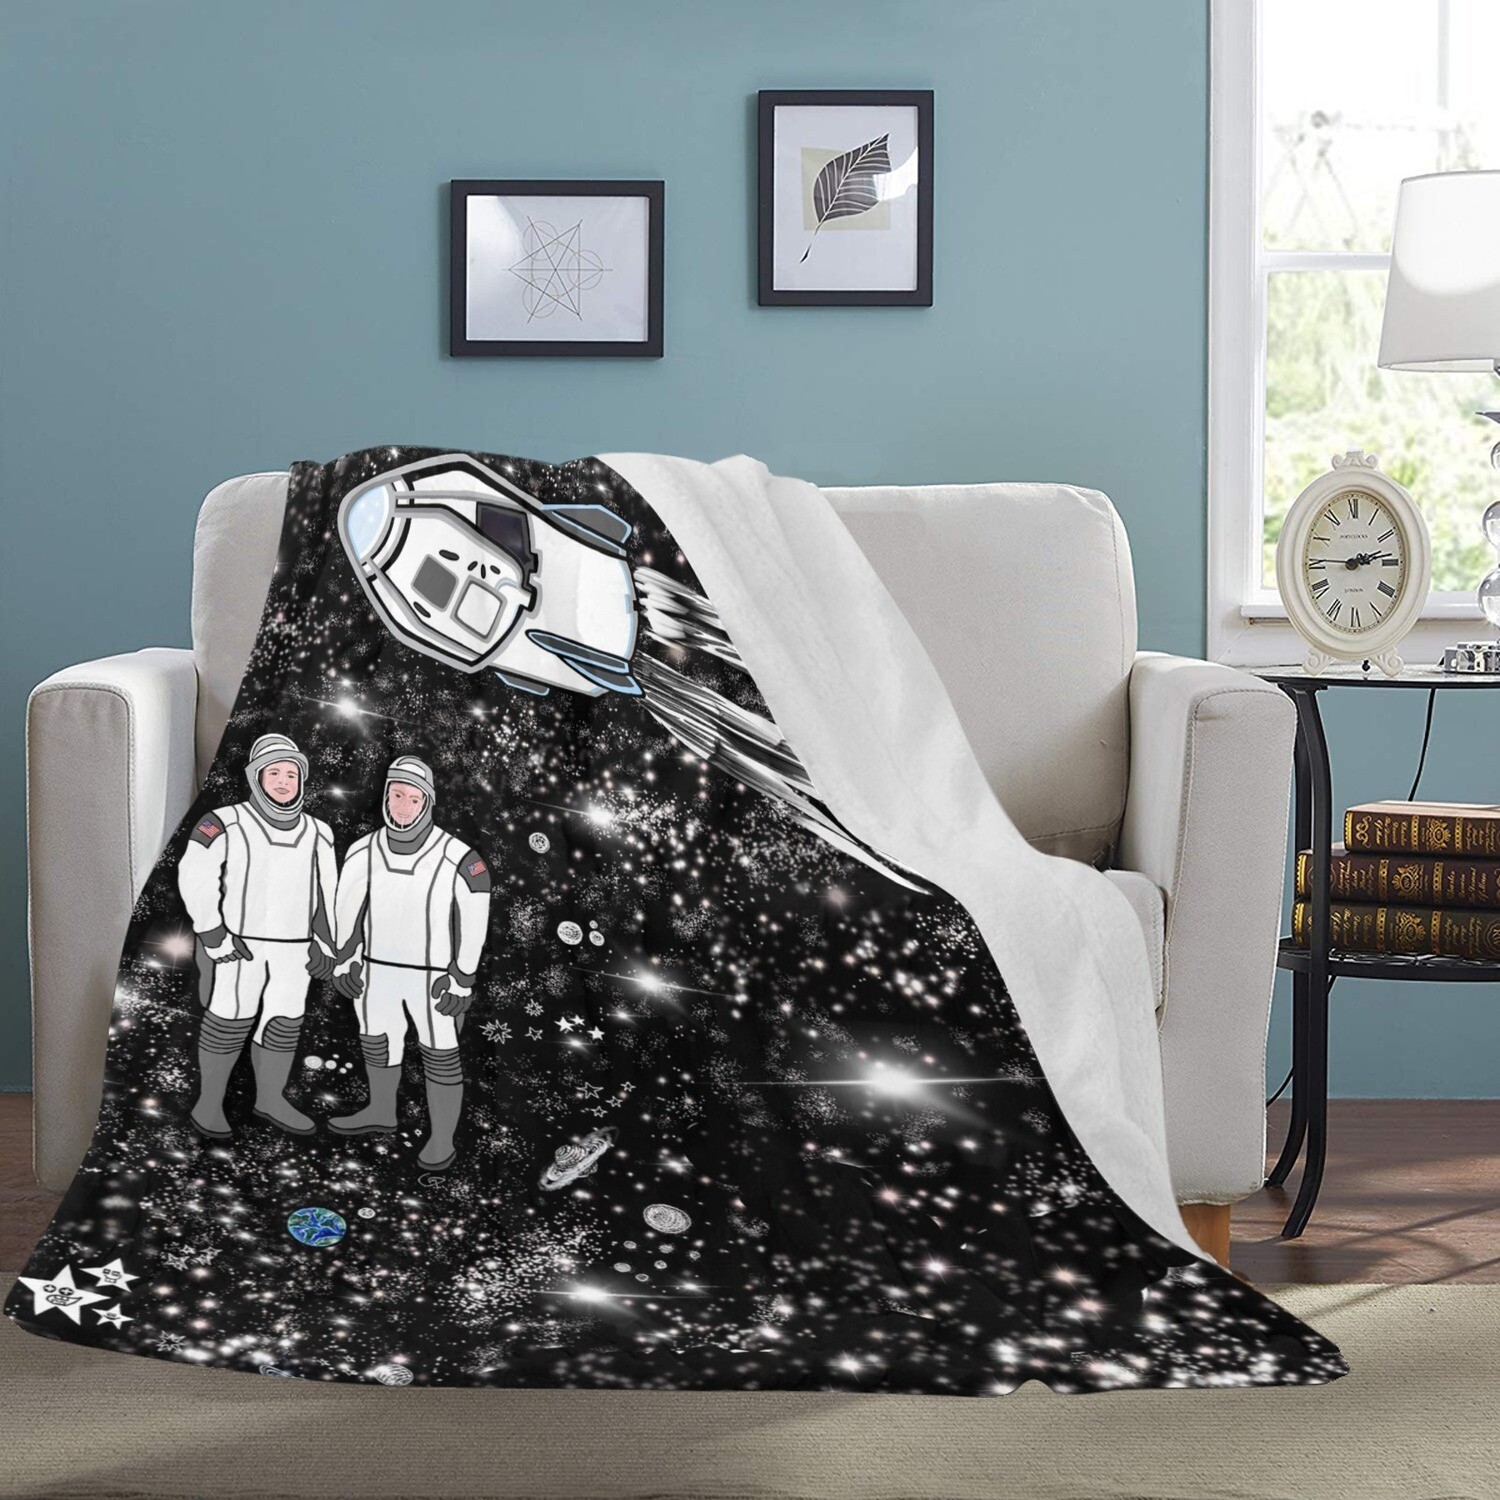 🤴🏽👸🏽👨🏽‍🚀🚀Large Ultra-Soft Micro Fleece Blanket Robert Behnken Douglas Hurley Nasa SpaceX Crew Dragon by Maru, gift, gift for her, gift for him, gift for them, 70"x80"